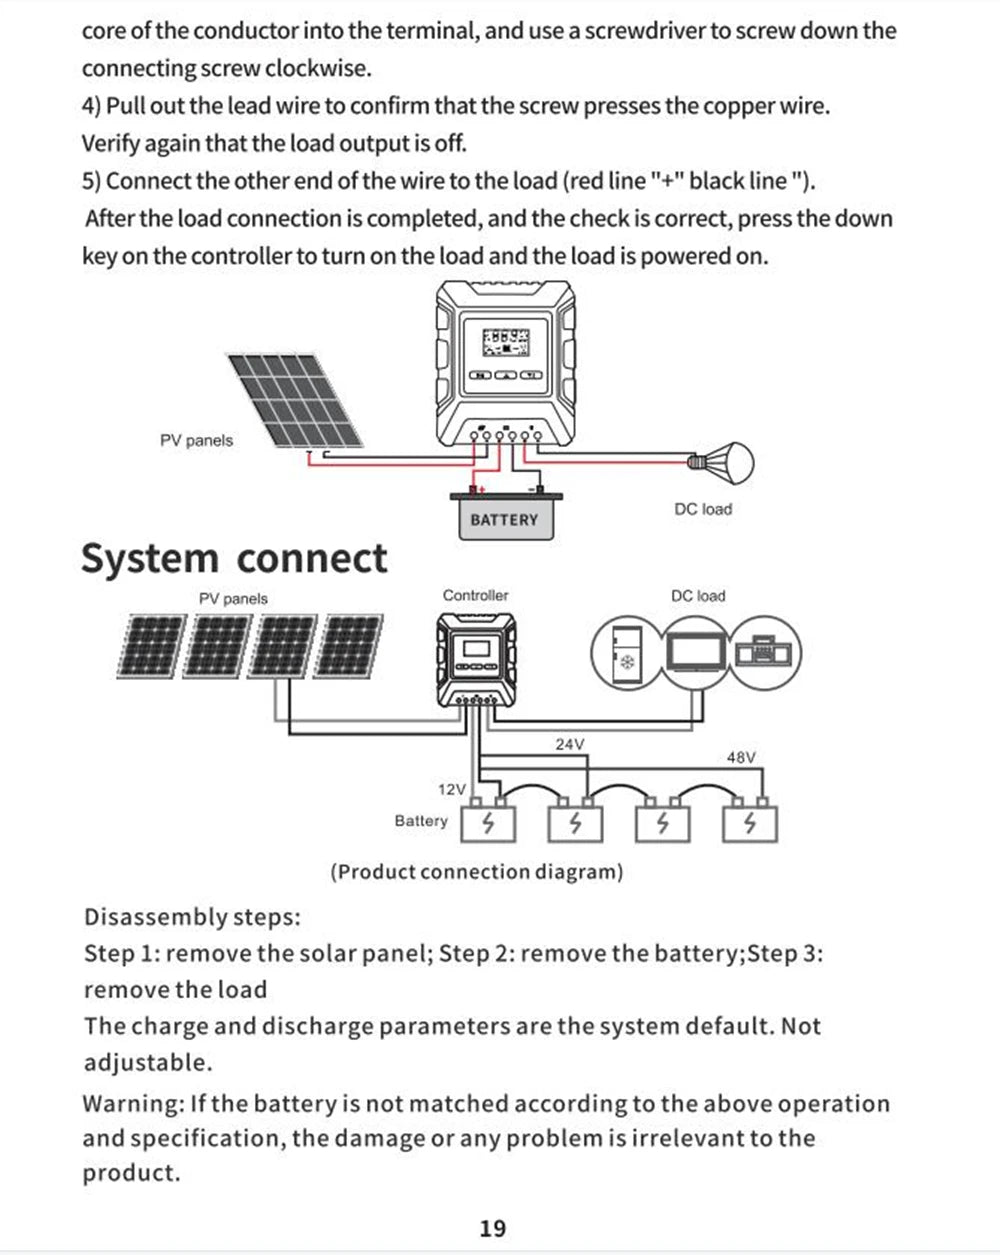 MPPT Solar Charge Controller, Solar charge controller regulates power from solar panels to recharge lithium, lead-acid, or LiFePO4 batteries safely.